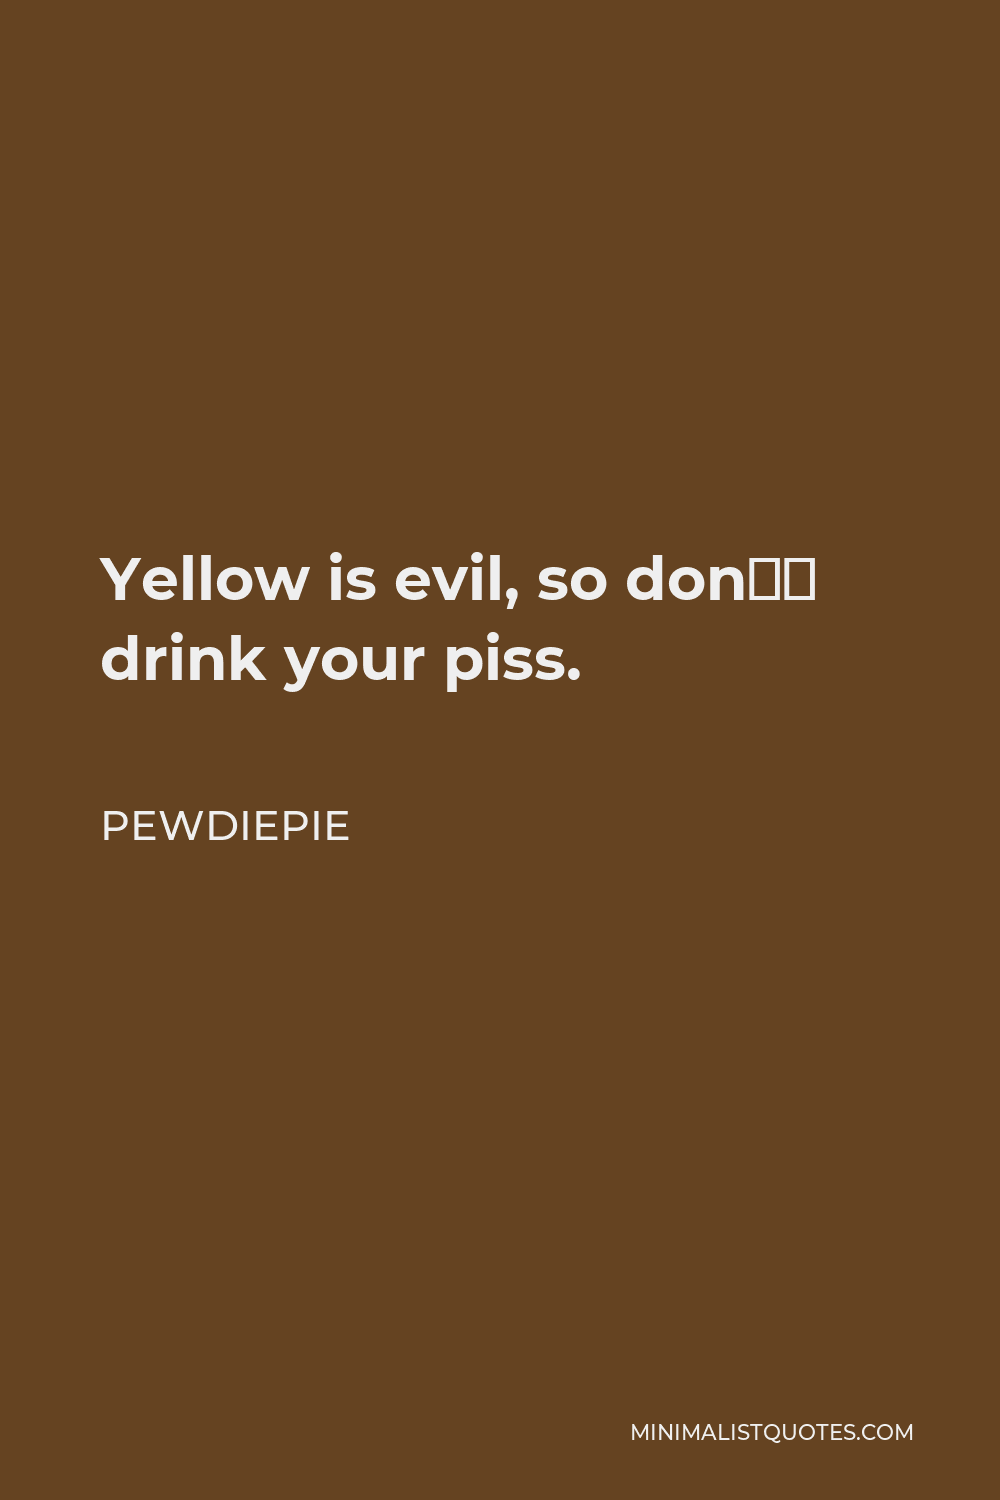 PewDiePie Quote - Yellow is evil, so don’t drink your piss.